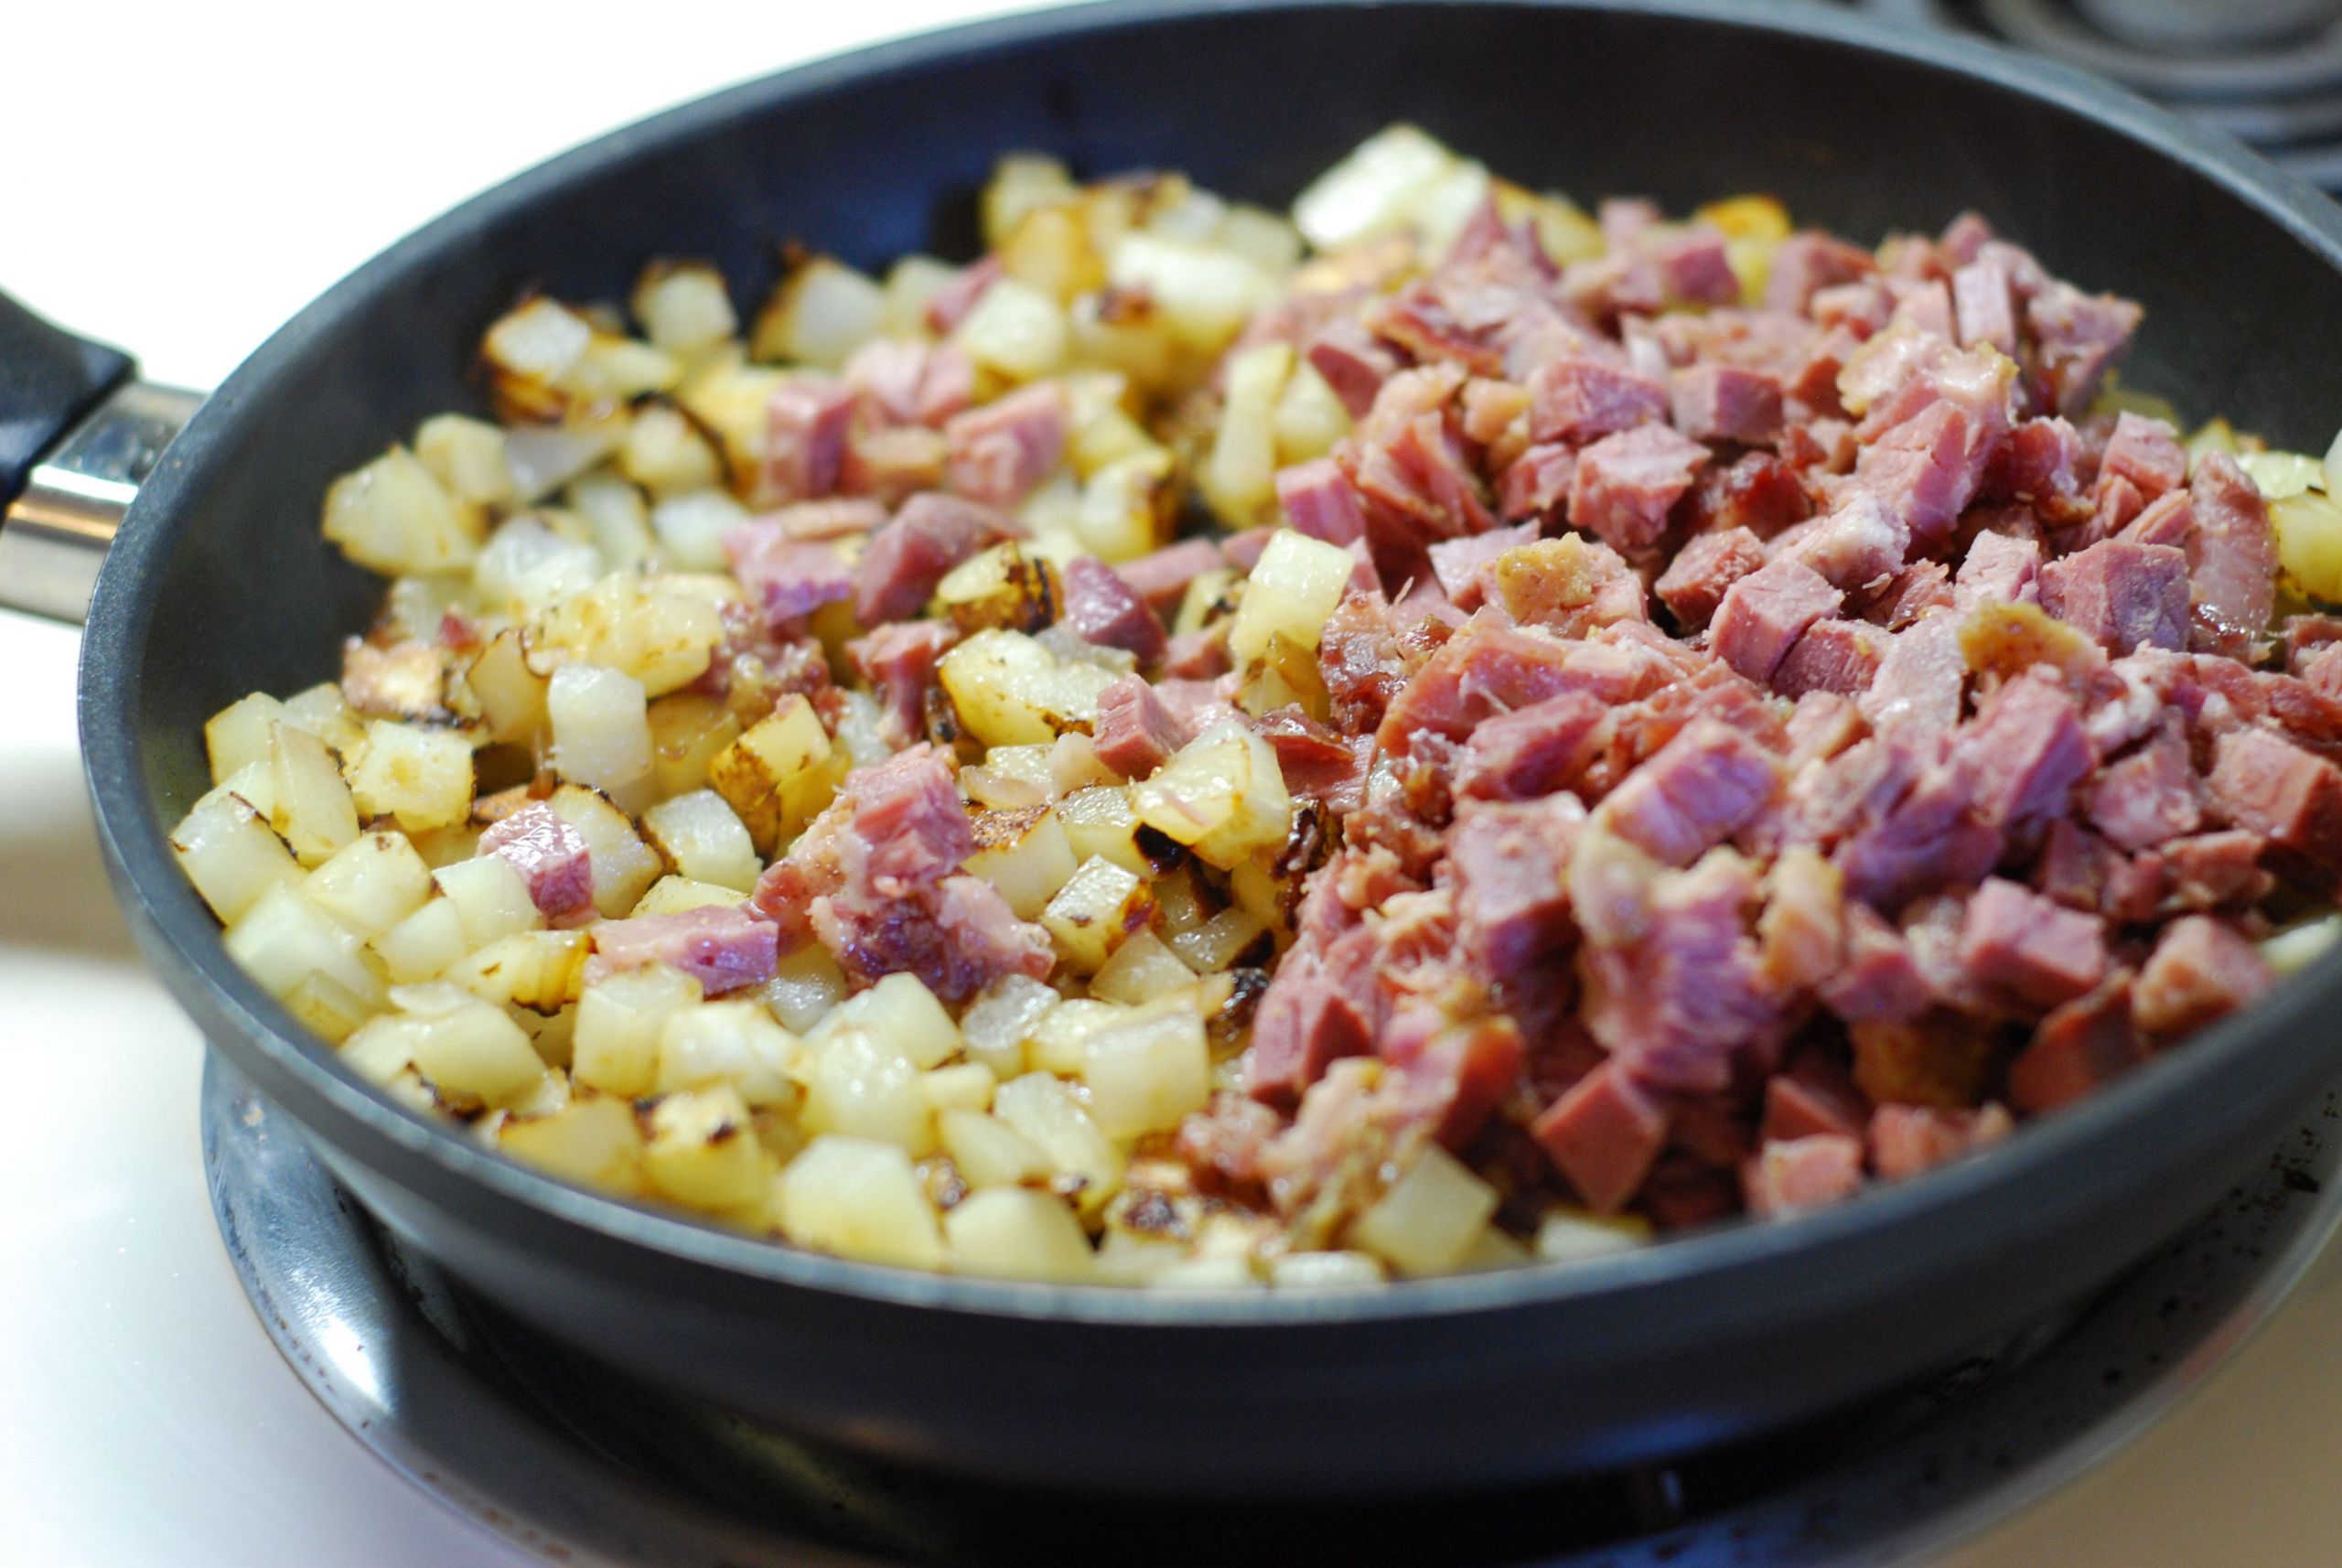 Canned Corn Beef Recipes Unique Canned Corned Beef Hash